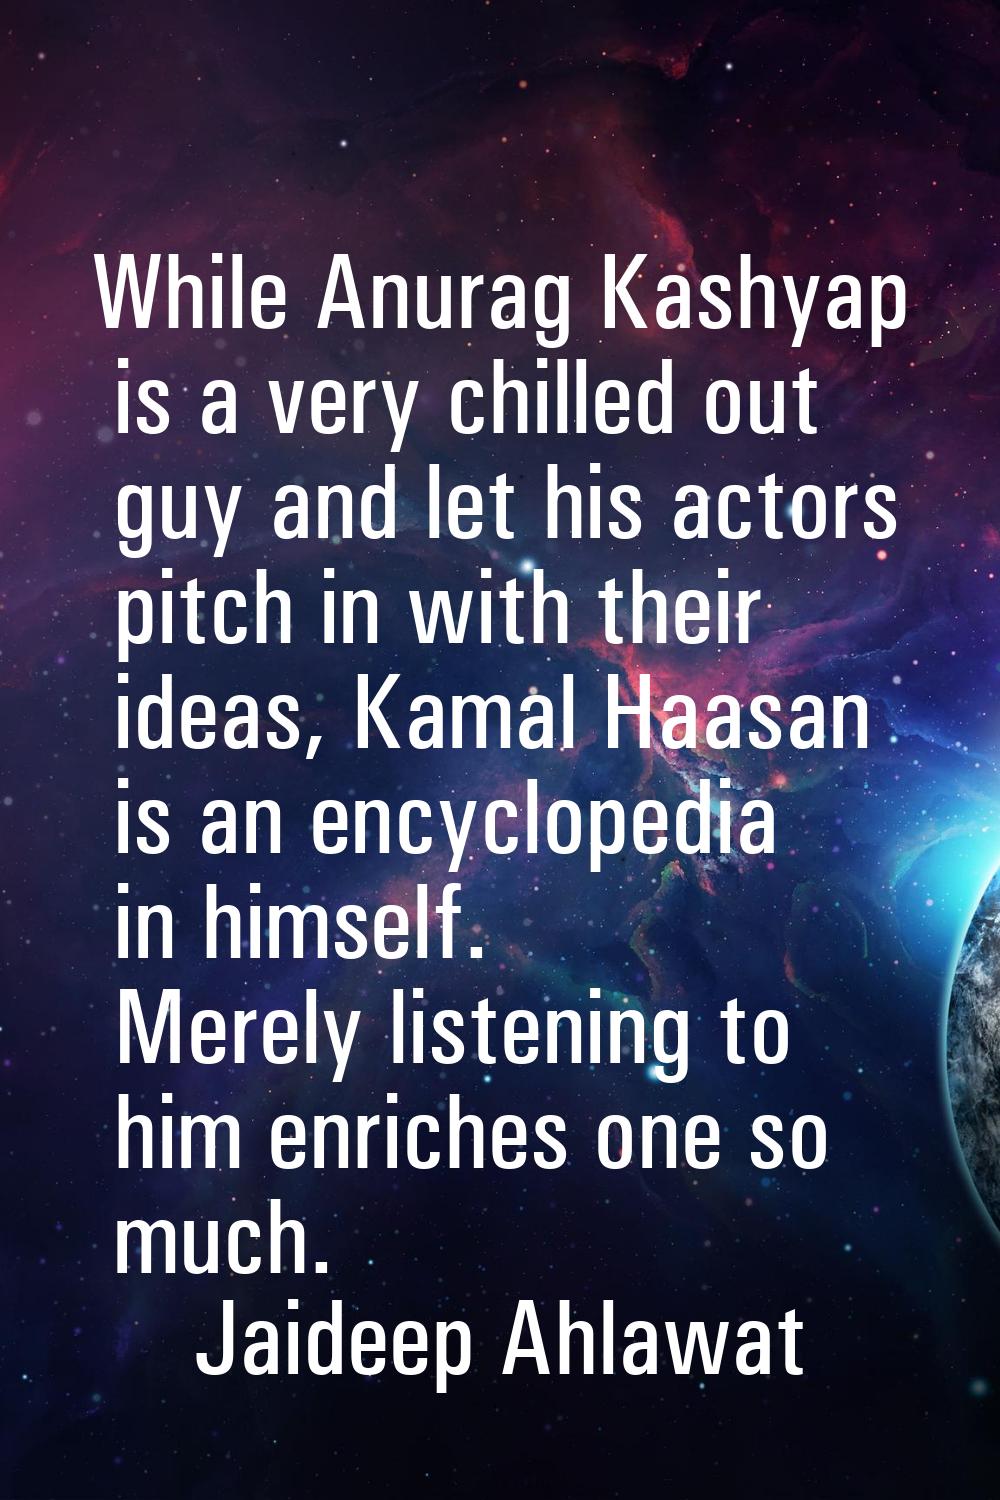 While Anurag Kashyap is a very chilled out guy and let his actors pitch in with their ideas, Kamal 